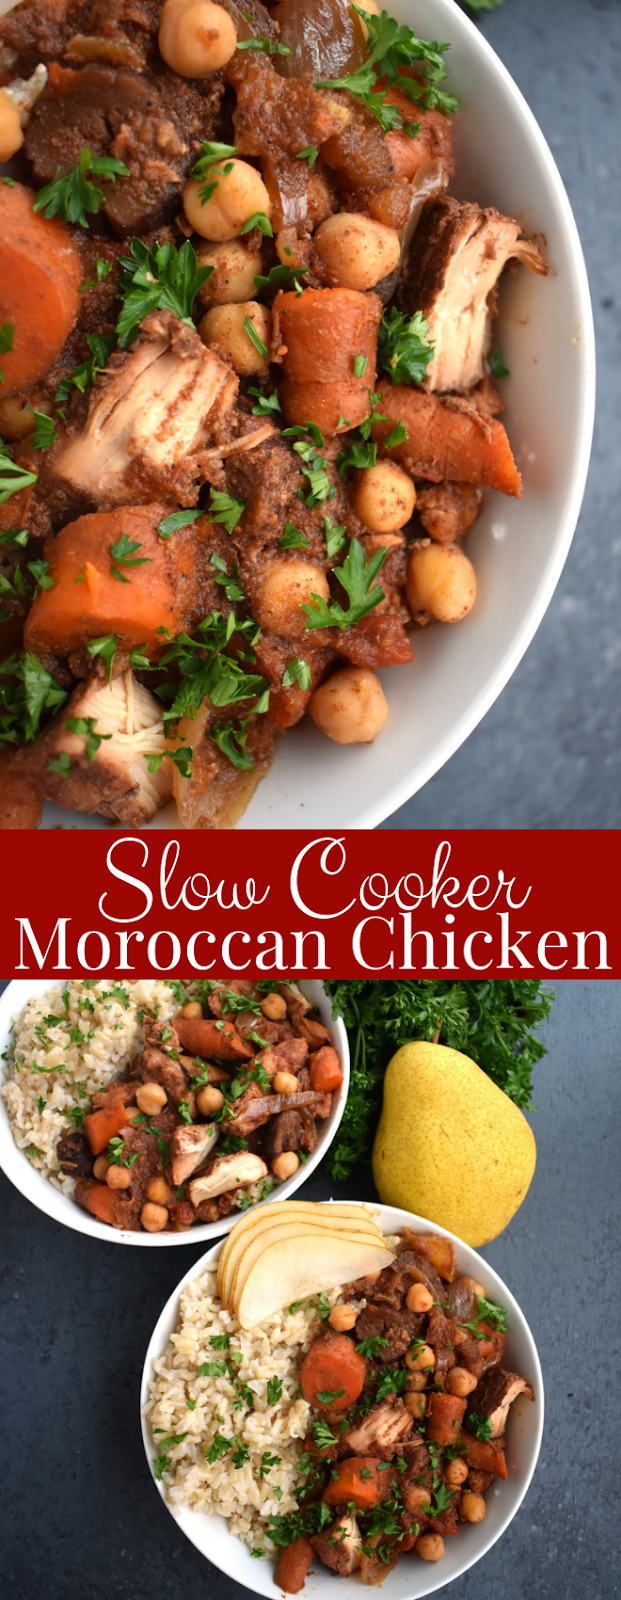 Slow Cooker Moroccan Chicken is loaded with flavor, tender chicken, carrots, chickpeas, pears, Moroccan spices and more for the perfect cozy meal! Serve over brown rice, cauliflower rice or quinoa. www.nutritionistreviews.com #healthy #cleaneating #dinner #slowcooker #chicken #crockpot